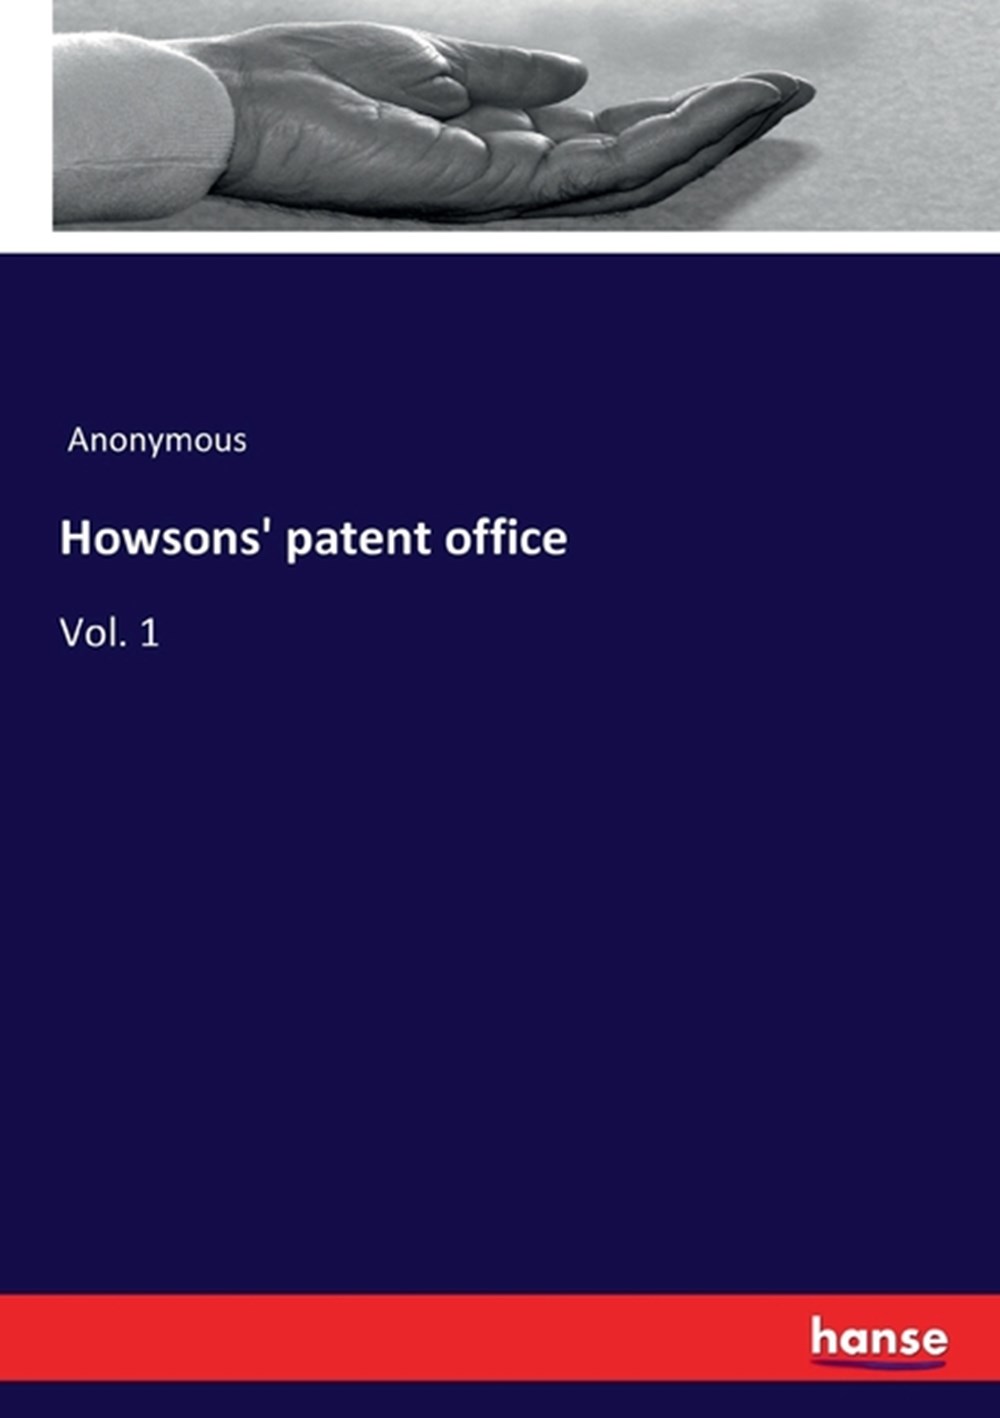 Howsons' patent office: Vol. 1